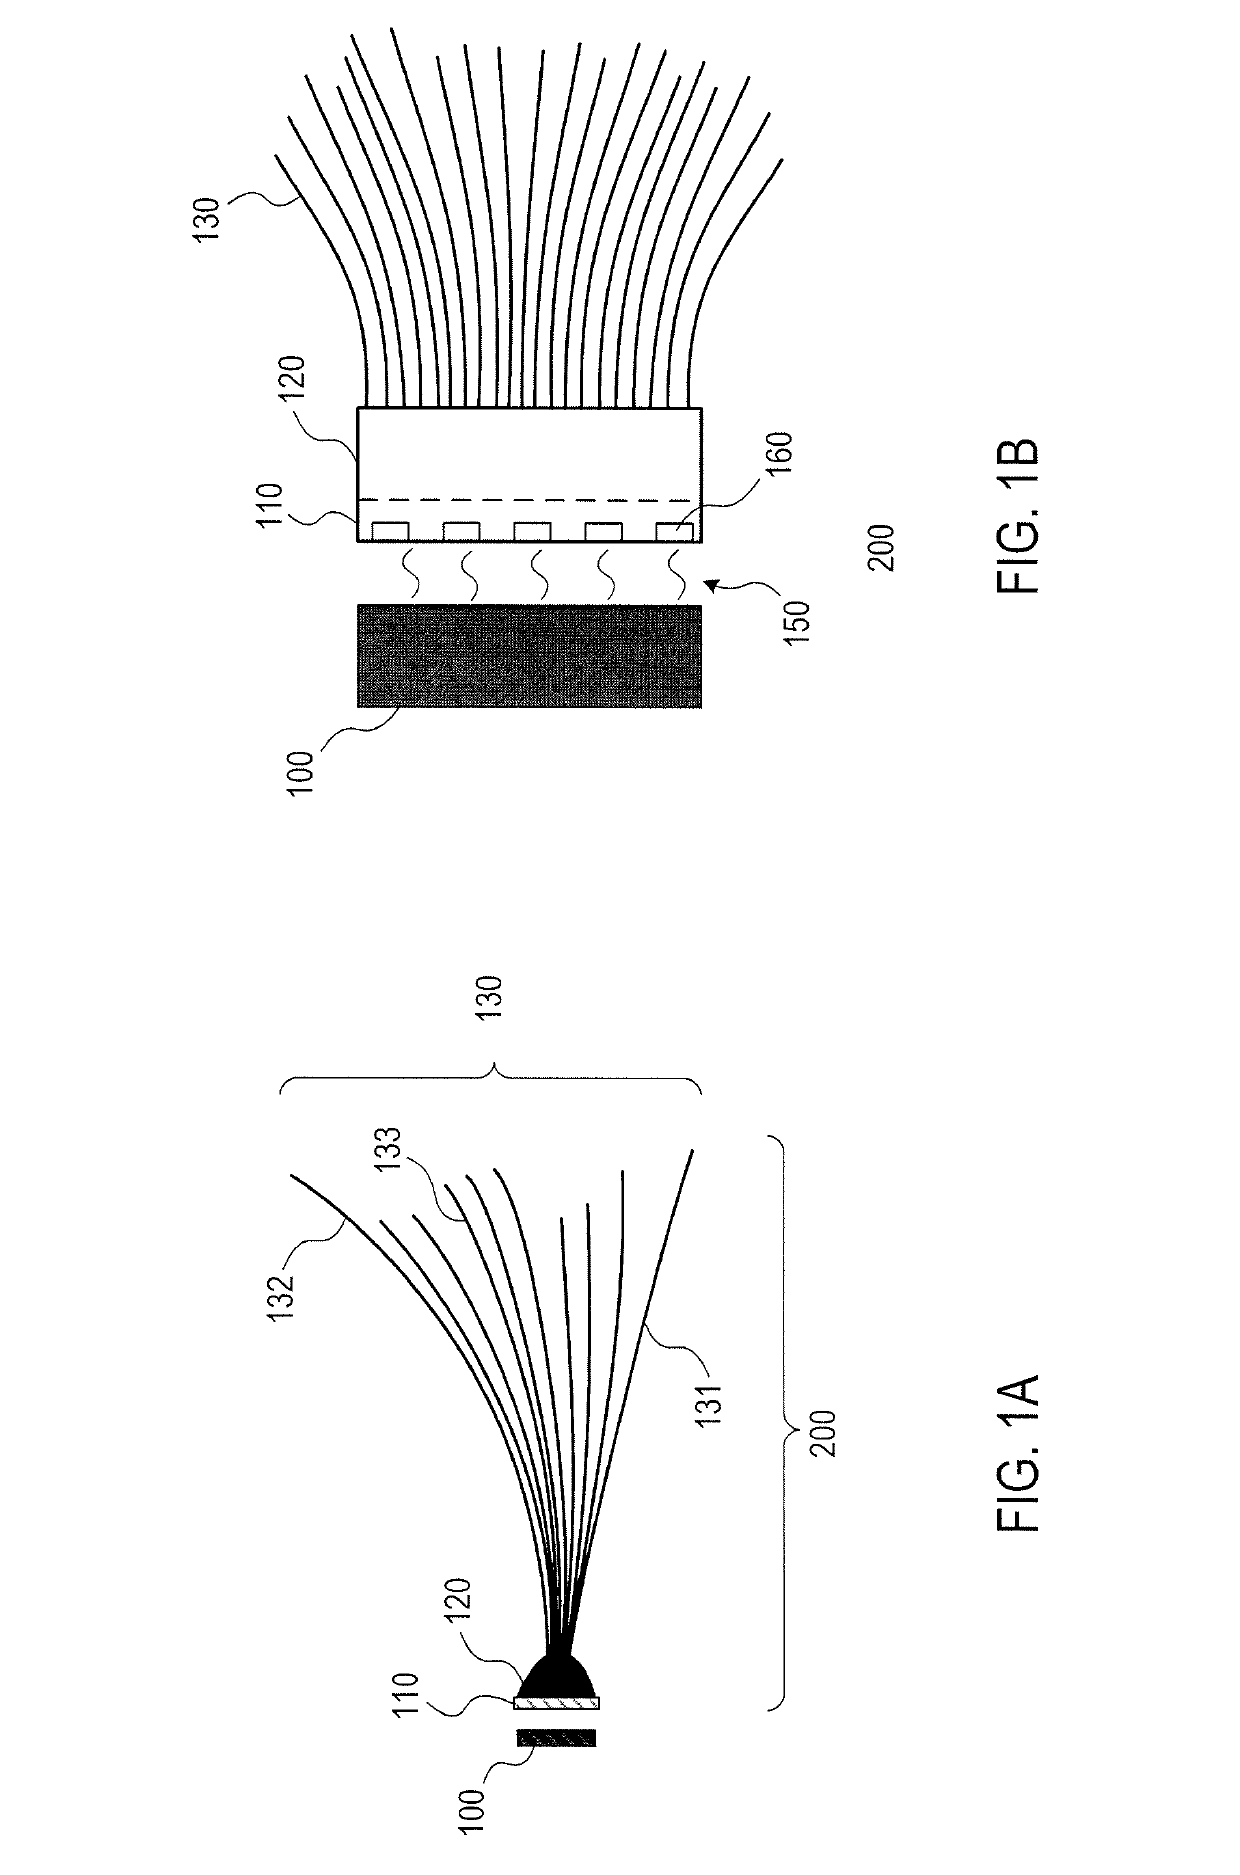 Magnetically attachable eyelash prosthetic system and related methods